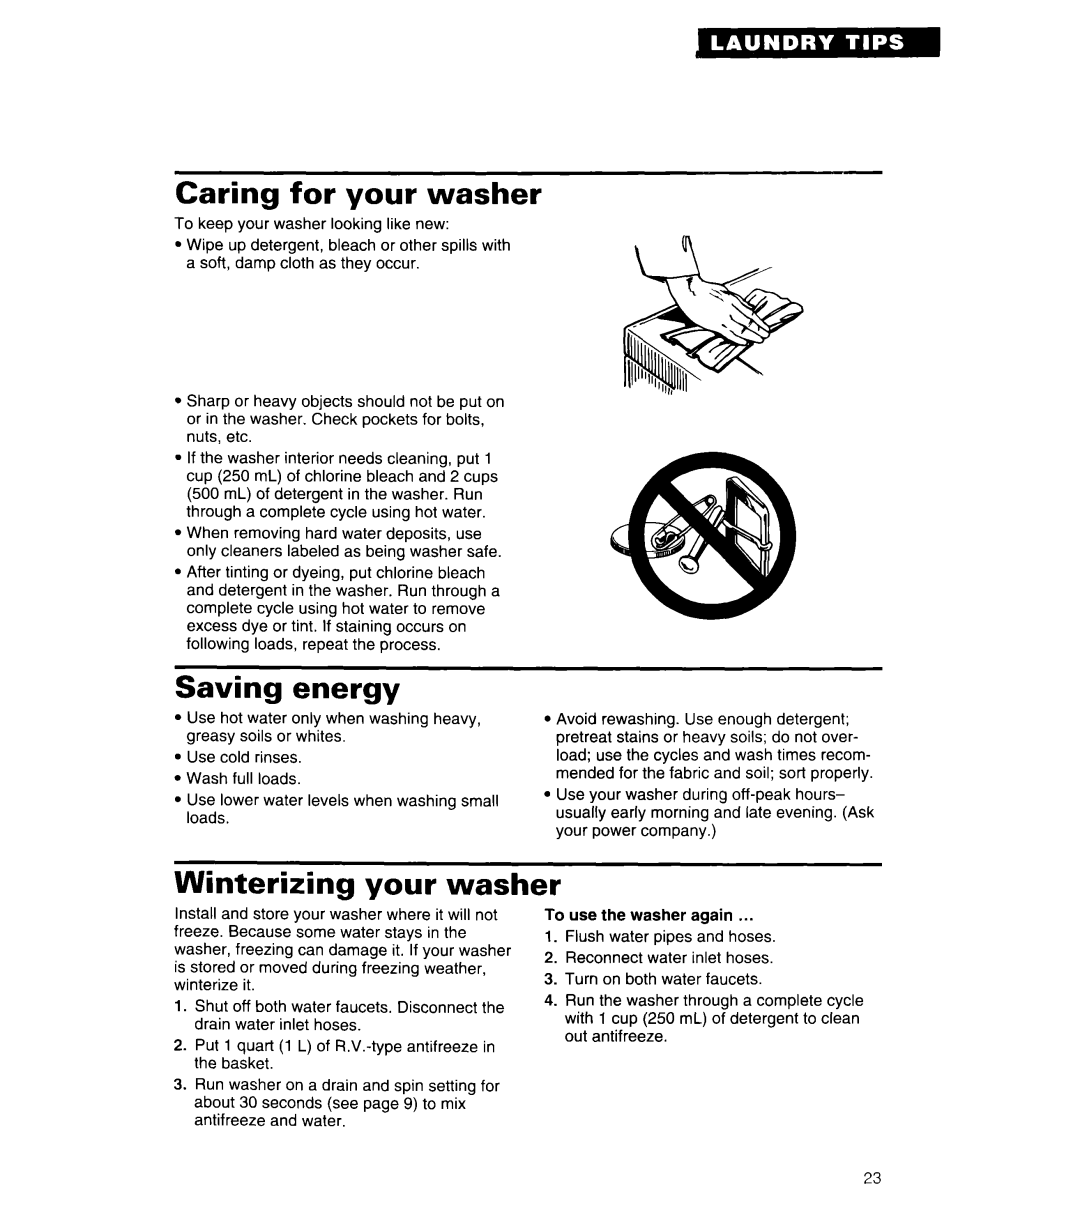 Whirlpool 3360461 warranty Caring for your washer, Saving energy, Winterizing your washer 